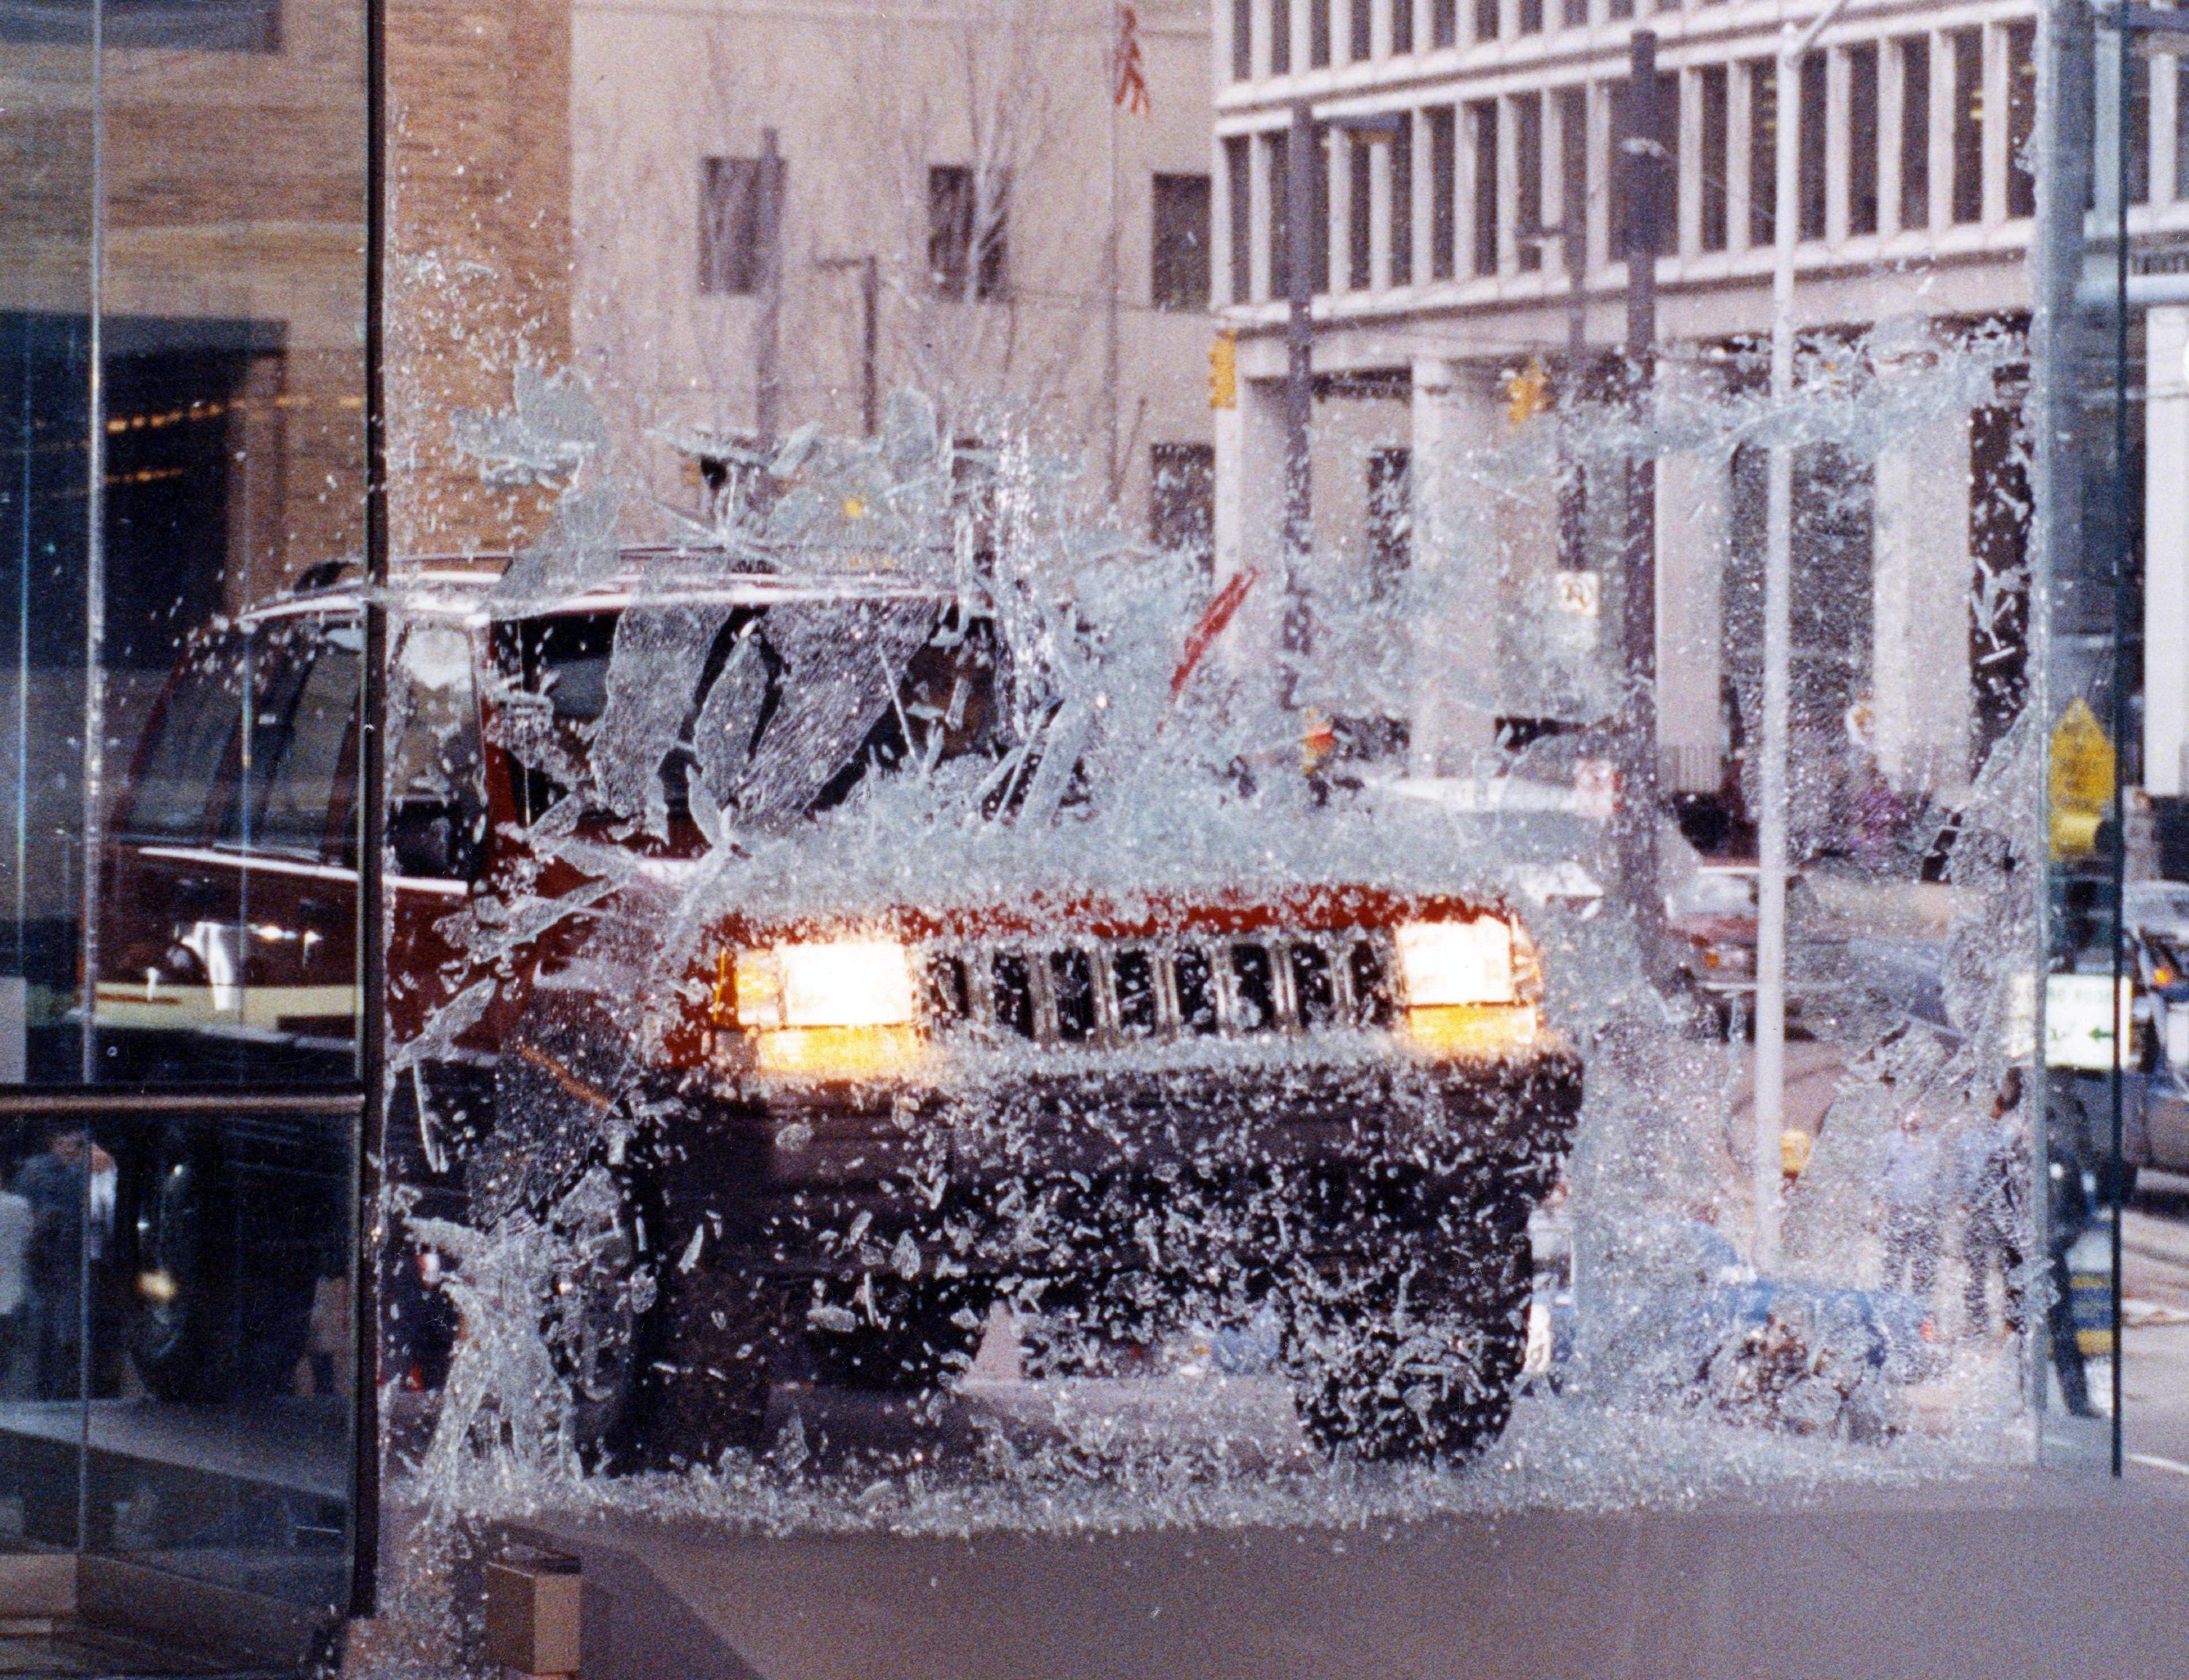 A 1993 Jeep Grand Cherokee driven by Chrysler's Bob Lutz with Detroit Mayor Coleman Young as a passenger smashes through a plate glass window and into Cobo Hall for its debut at the 1992 North American International Auto Show.